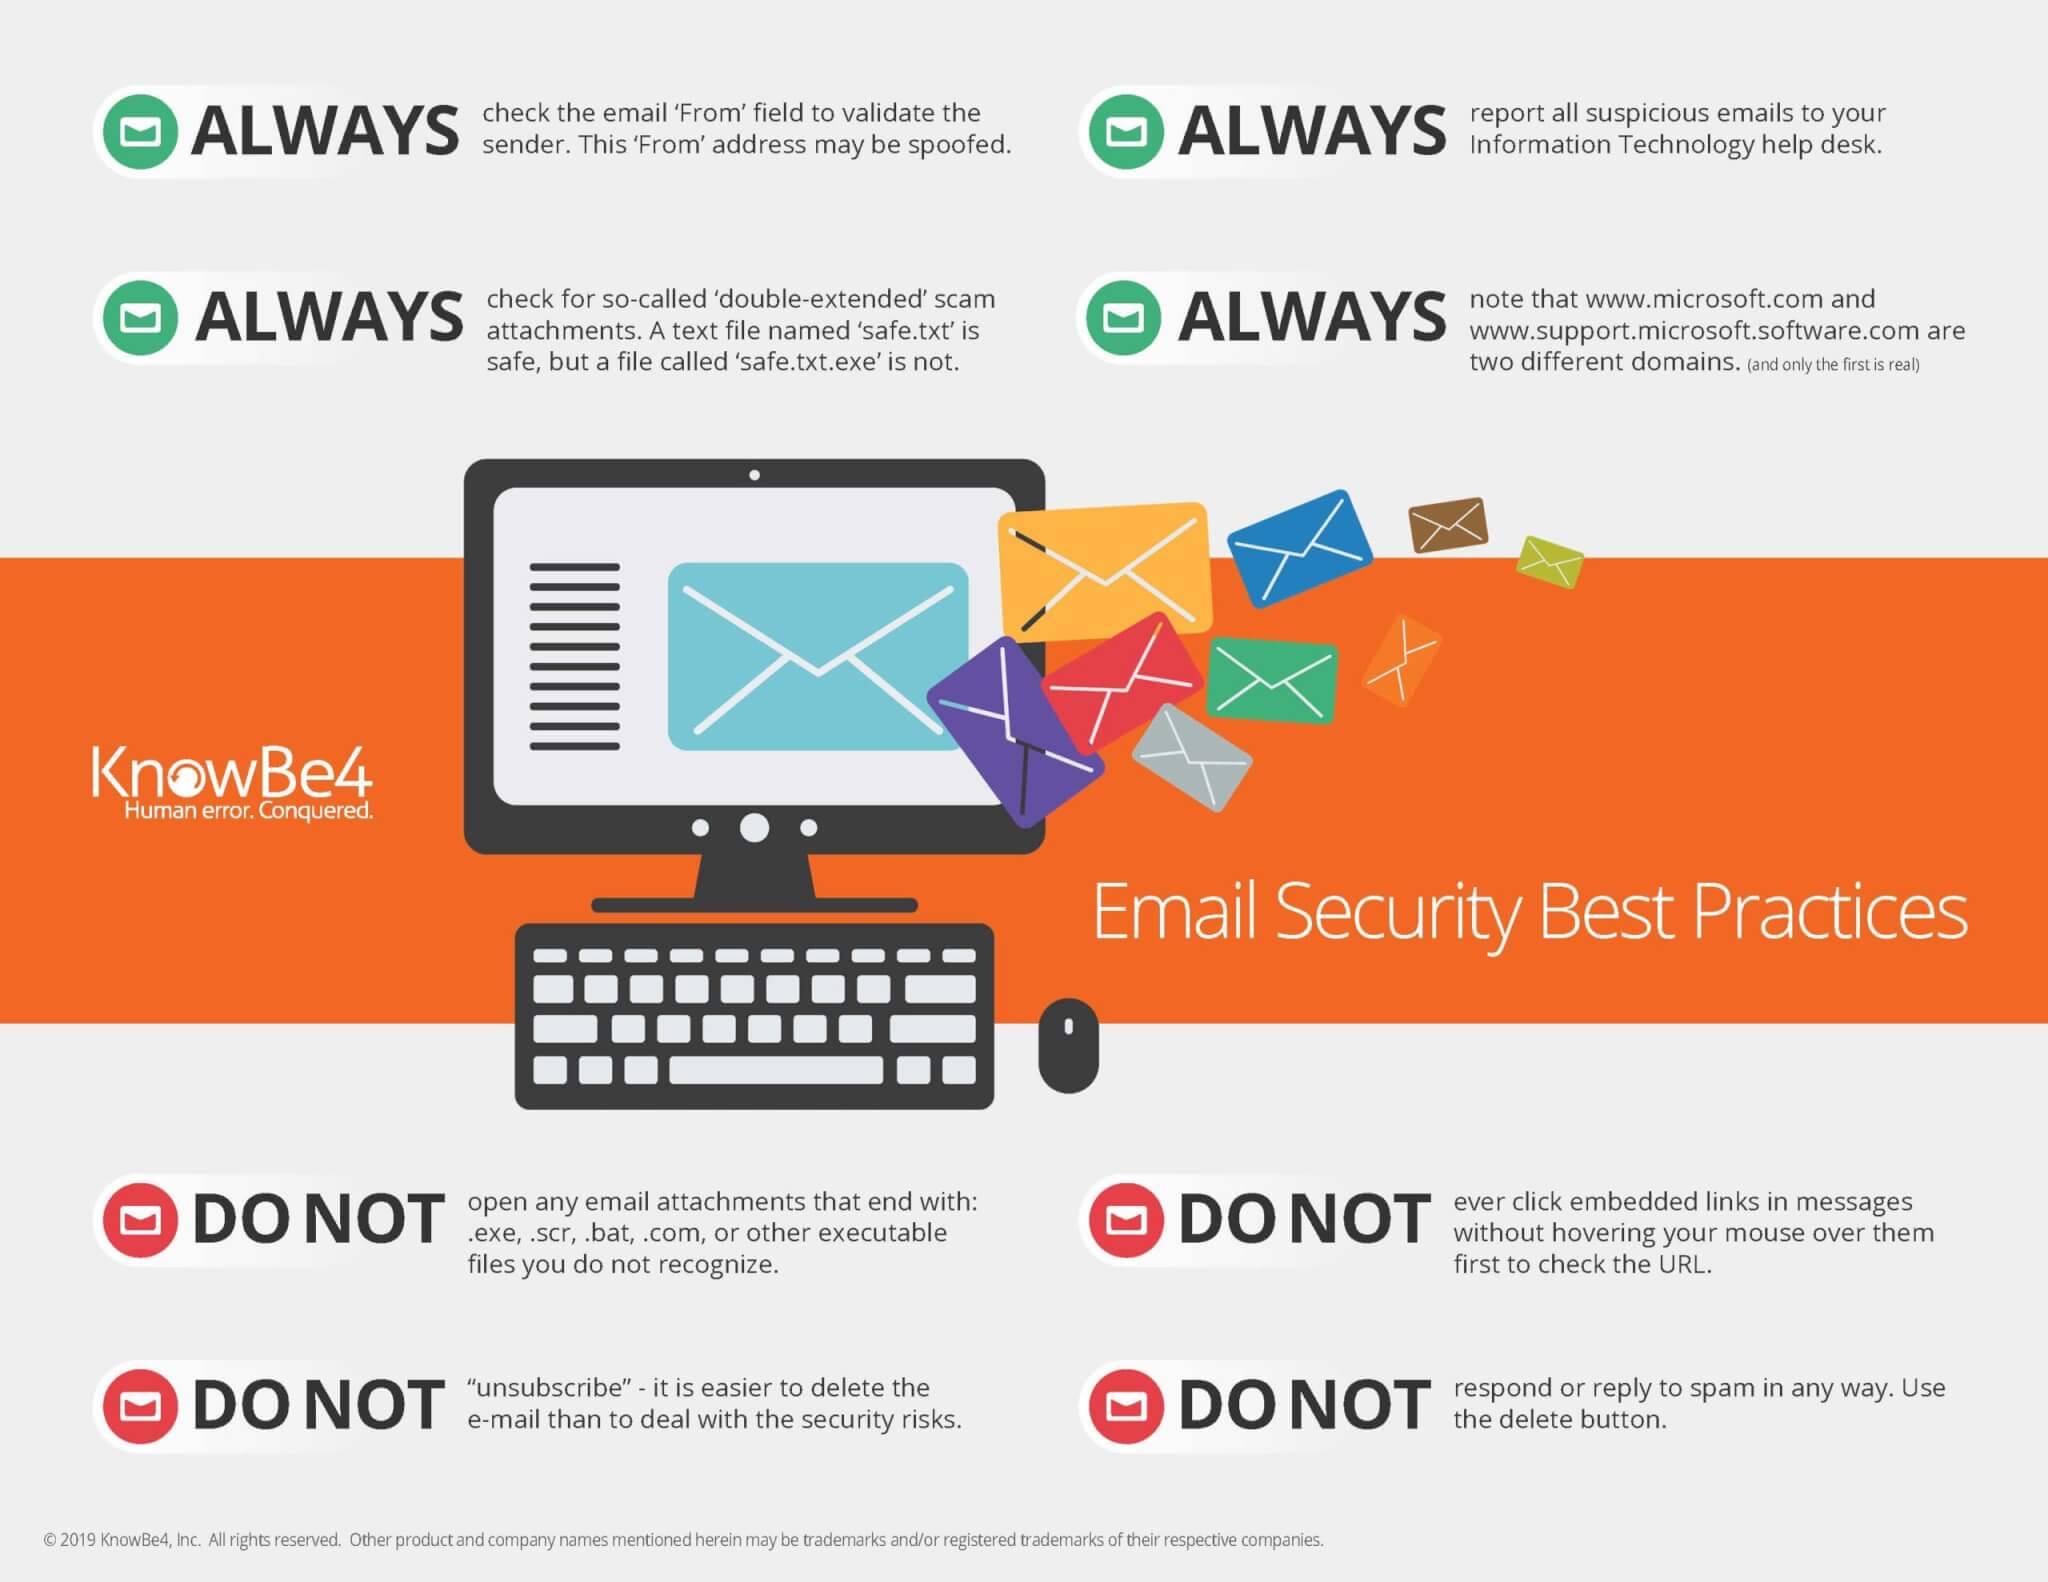 Email security Best Practices